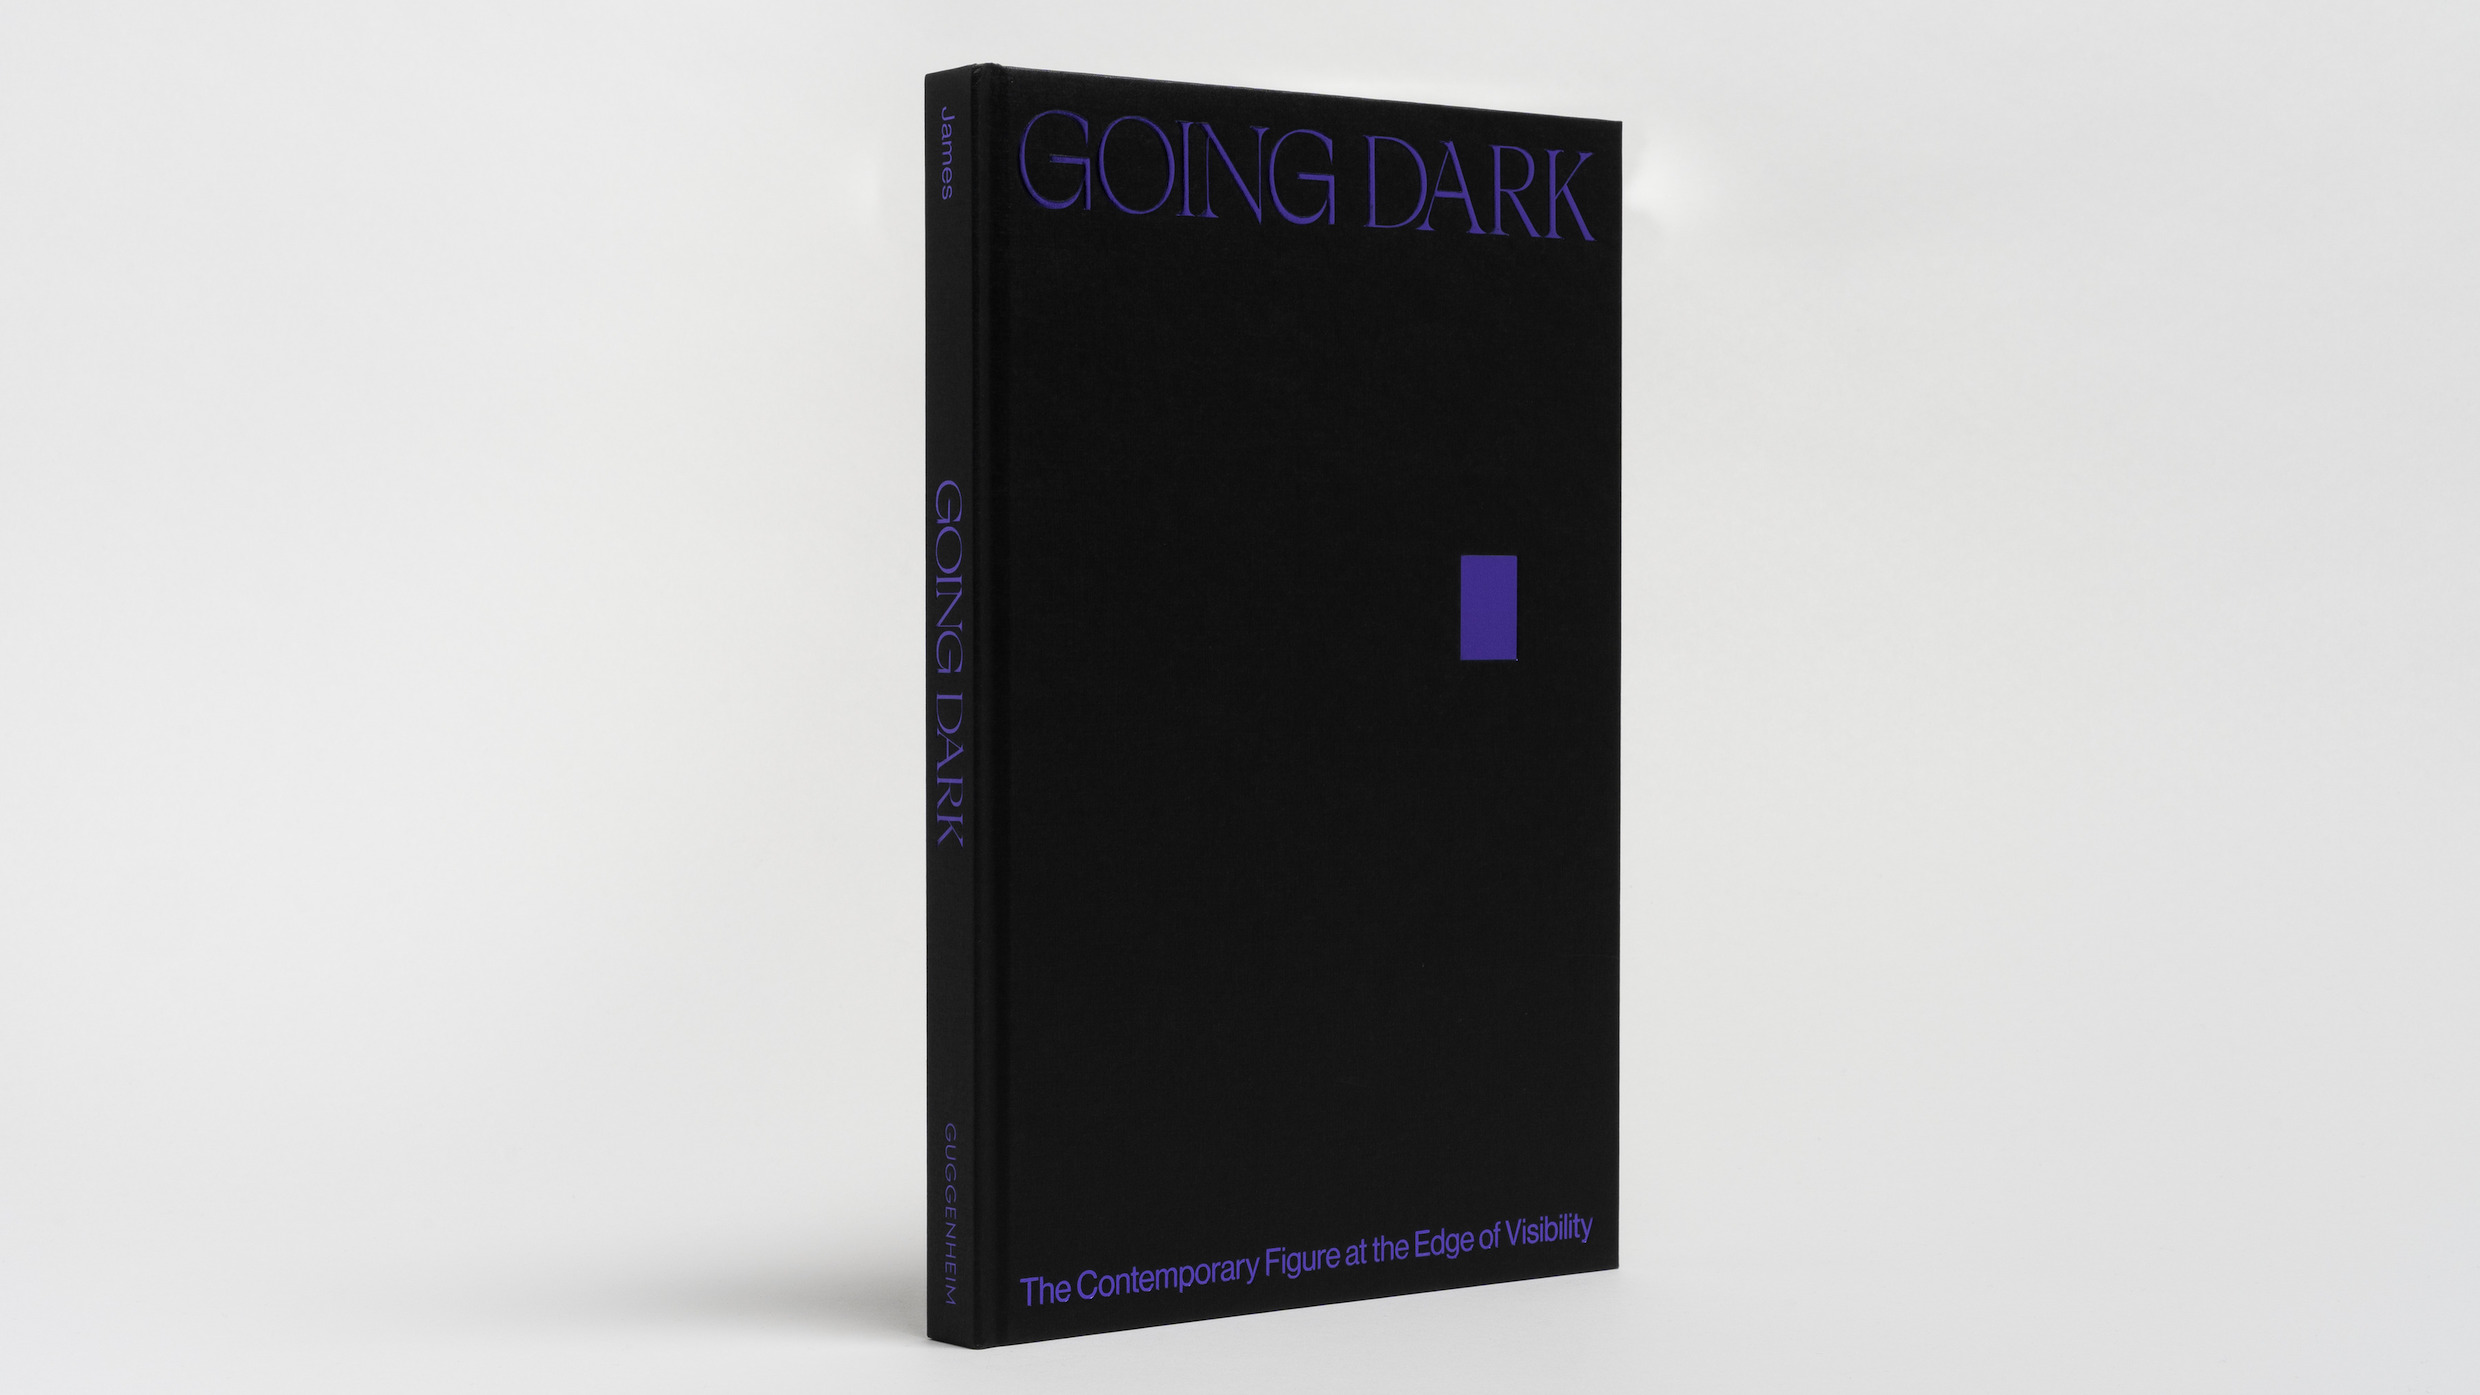 Going Dark: The Contemporary Figure at the Edge of Visibility